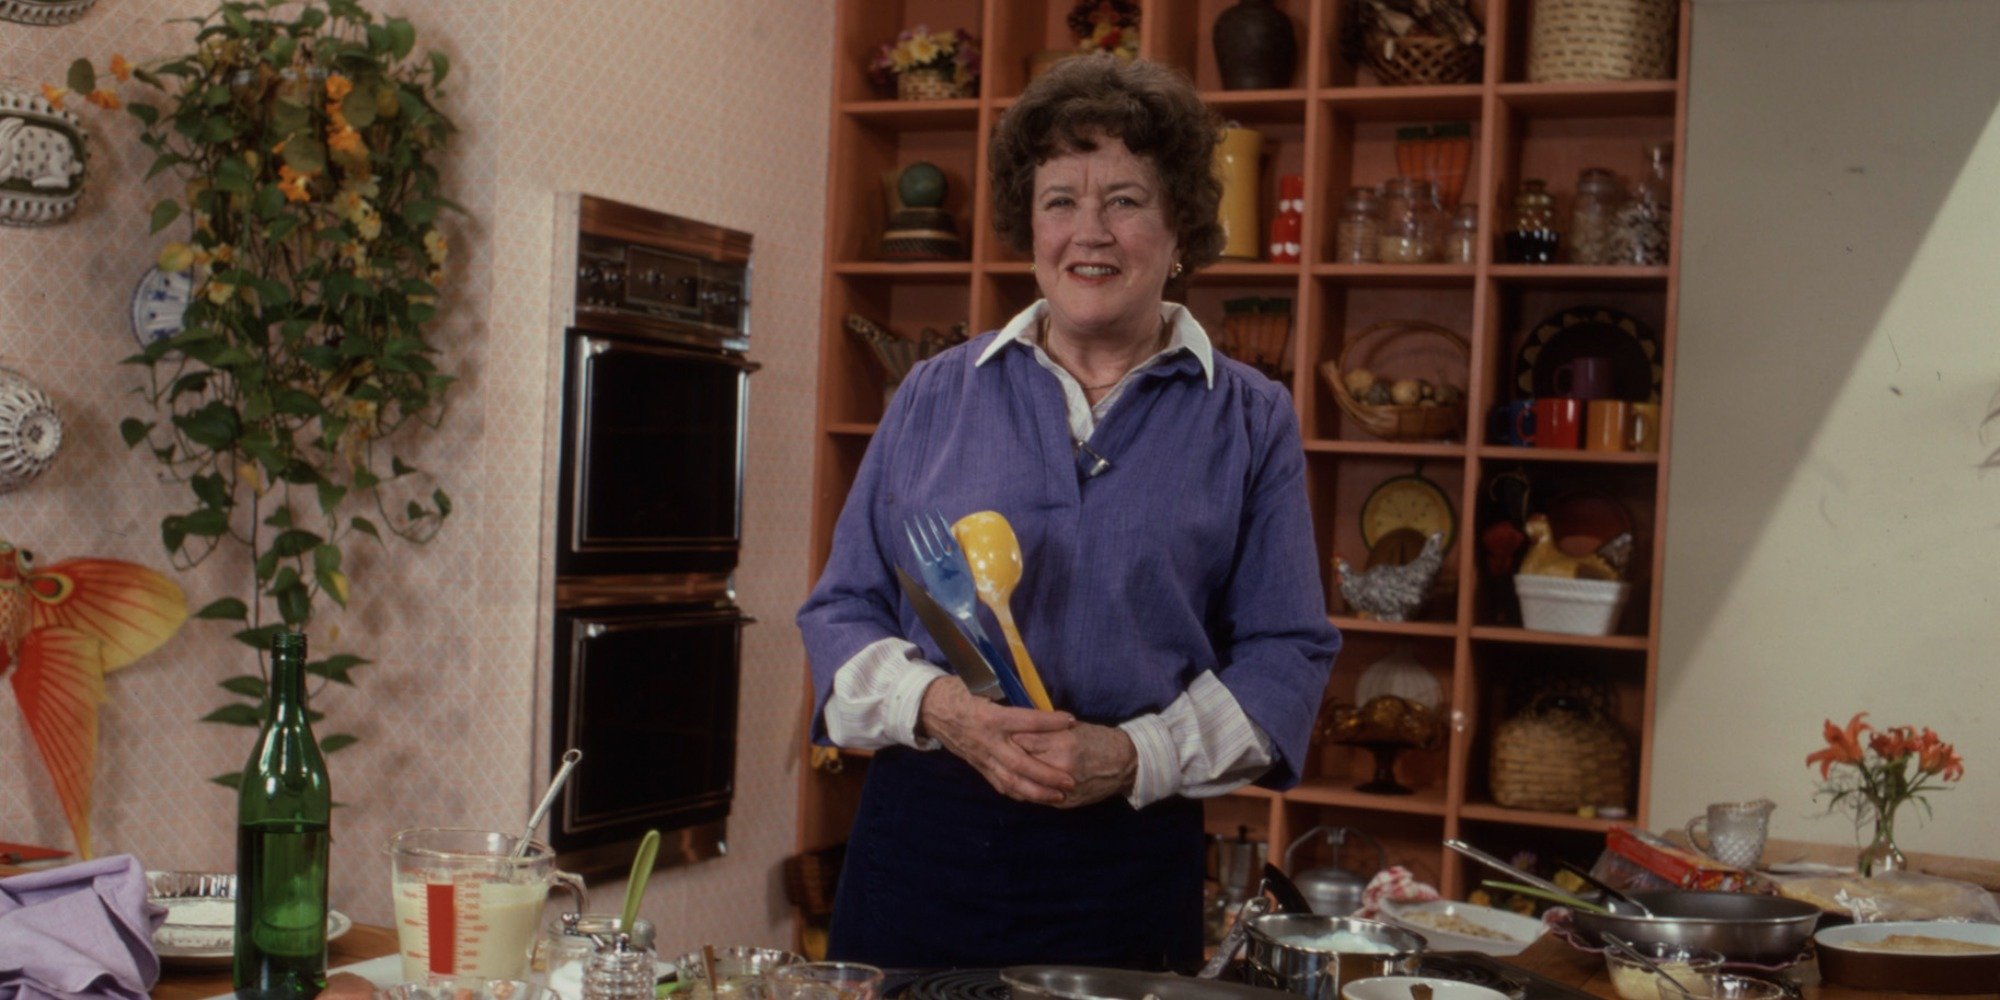 Julia Child photographed during a television appearance.